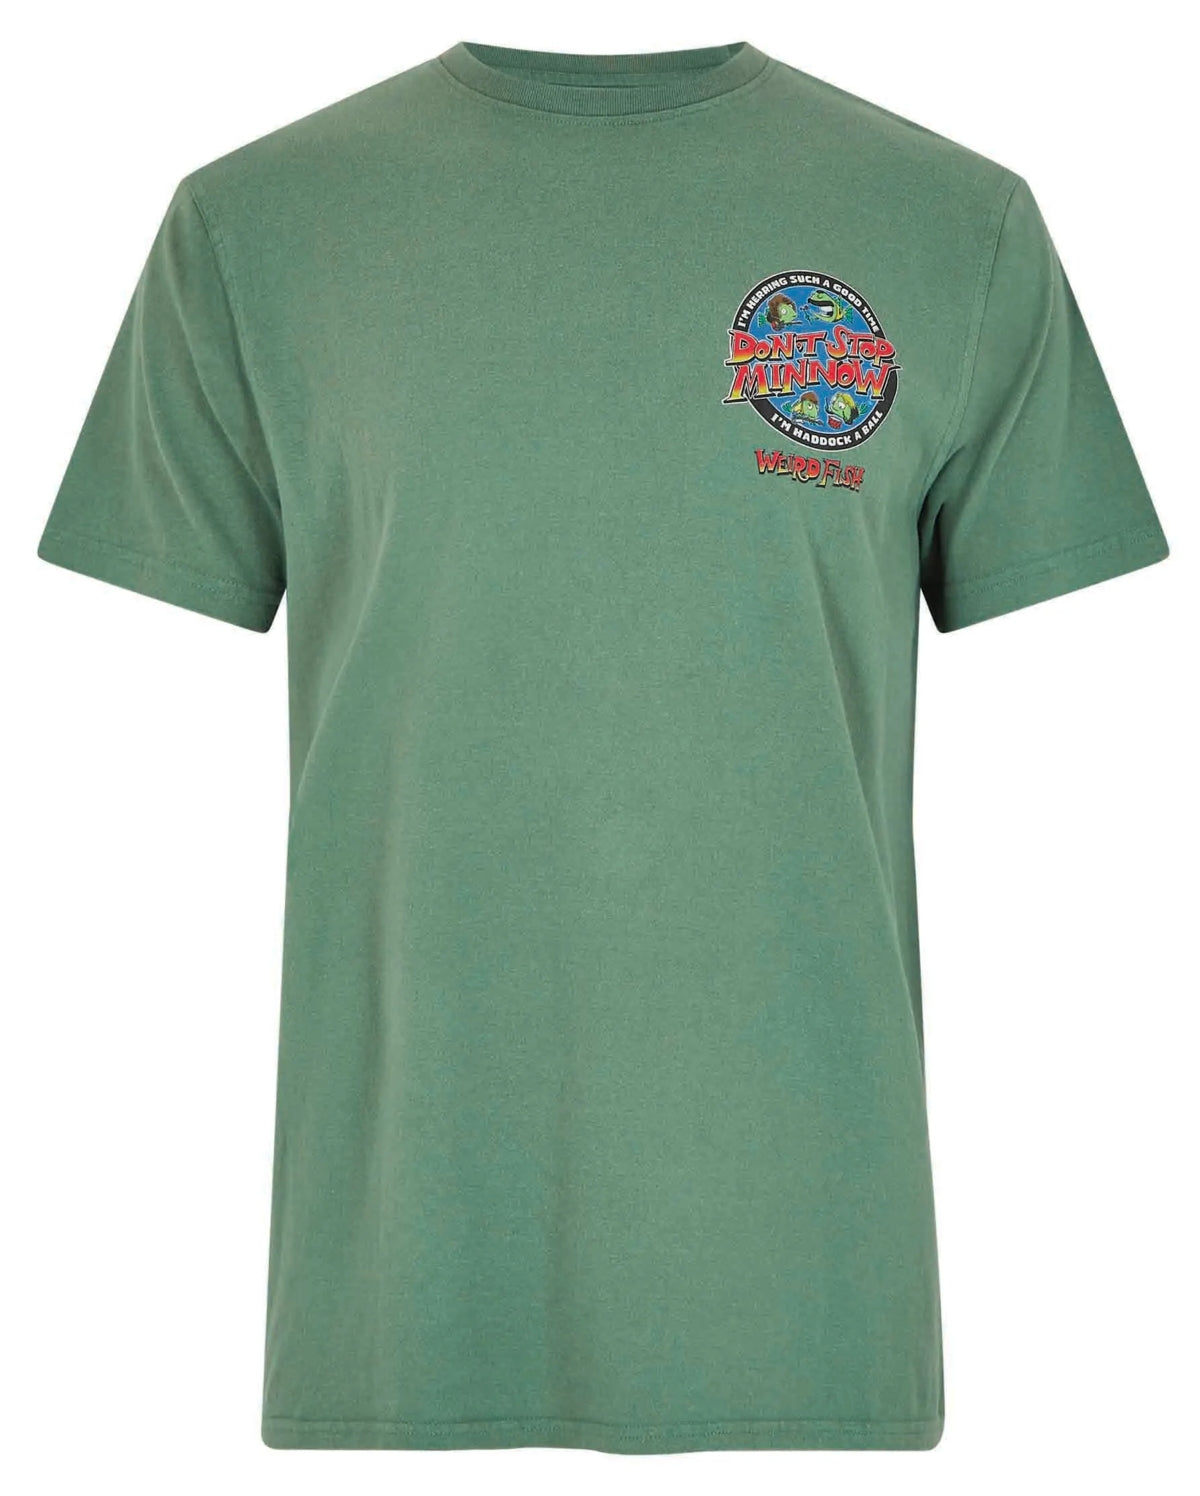 A men's short sleeve crew neck tee from Weird Fish in Dusky Green featuring their Queen themed Stop Minnow print.